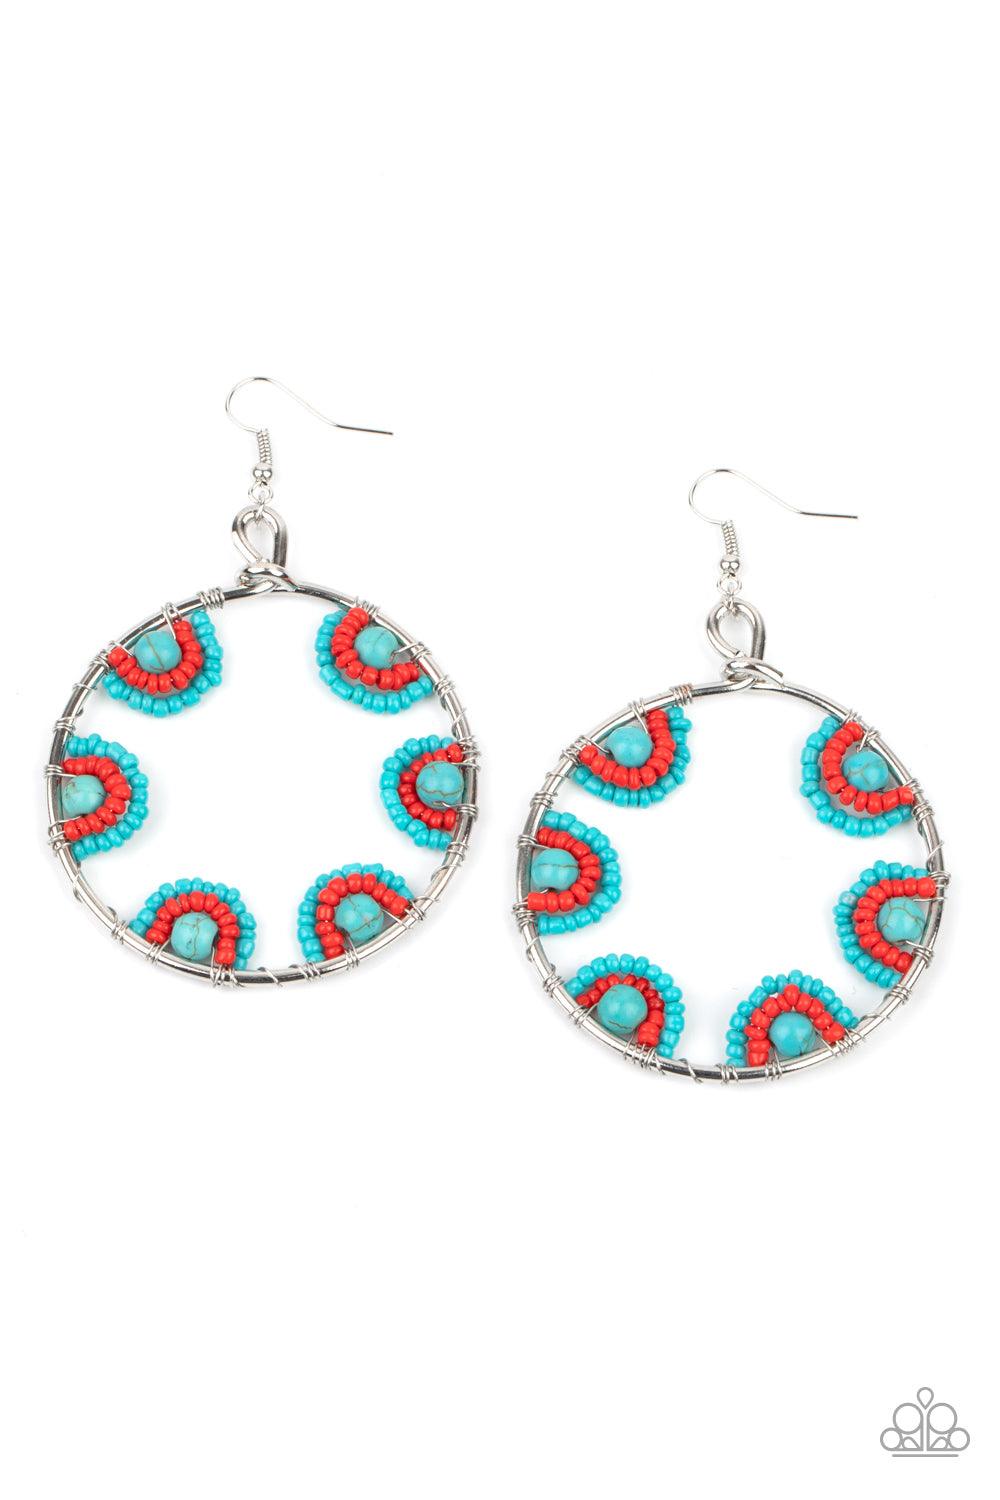 Paparazzi Accessories Off The Rim - Blue Red and turquoise seed beads are threaded on wires and looped over turquoise stones on the inside of a spacious silver hoop. The pattern makes its way around the inside of the circle for an around-the-world air. Ea